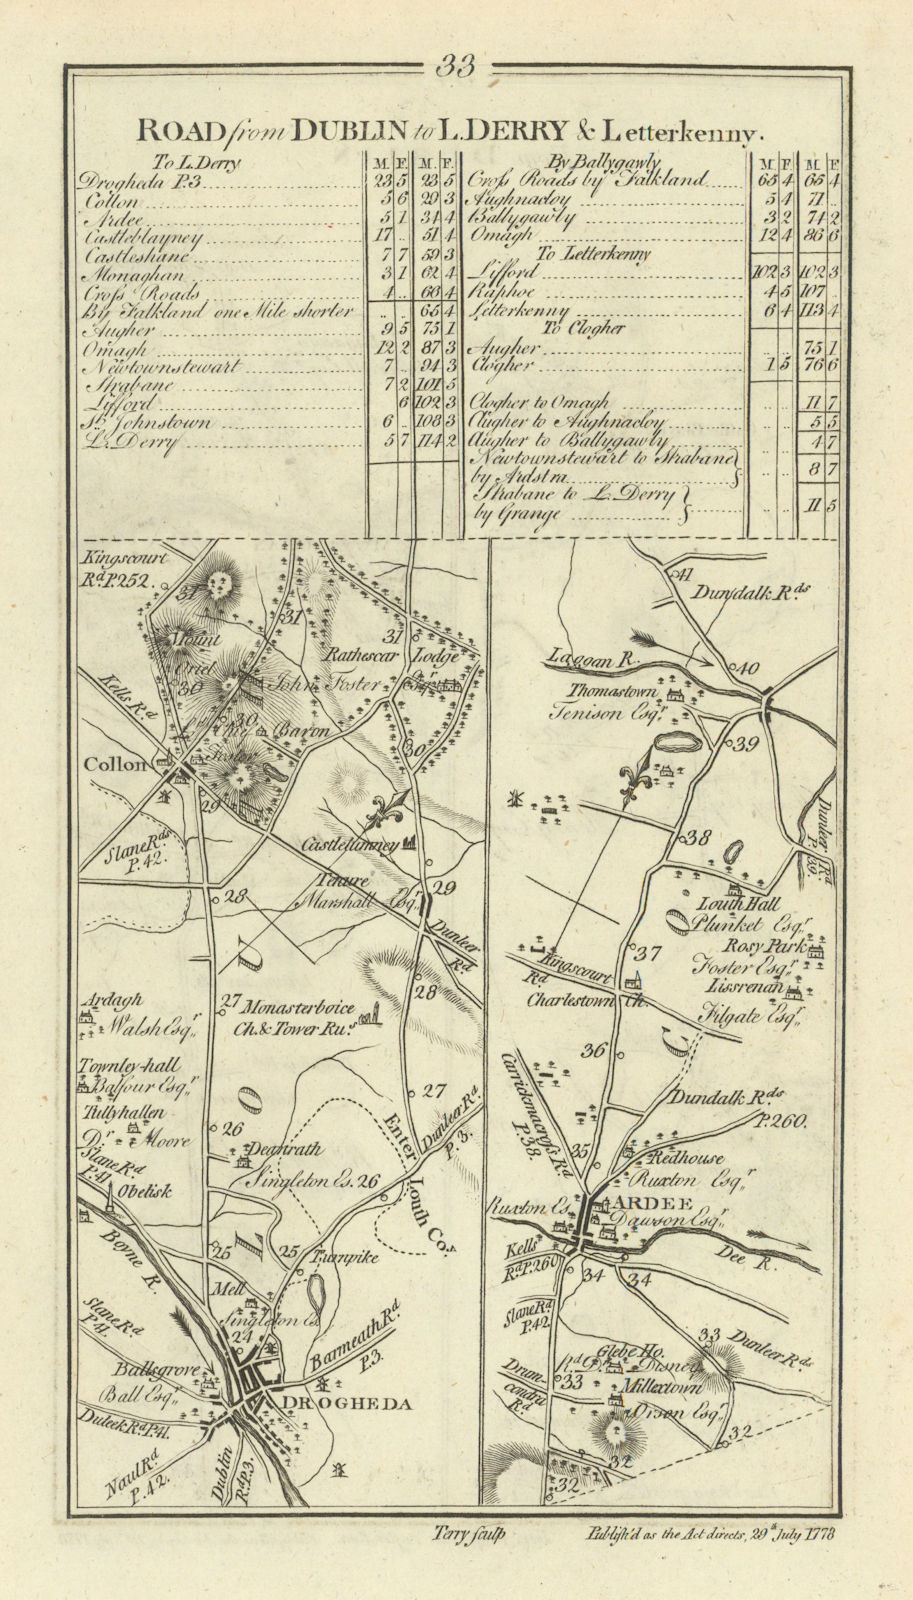 Associate Product #33 Dublin to L.Derry & Letterkenny. Drogheda Ardee. TAYLOR/SKINNER 1778 map